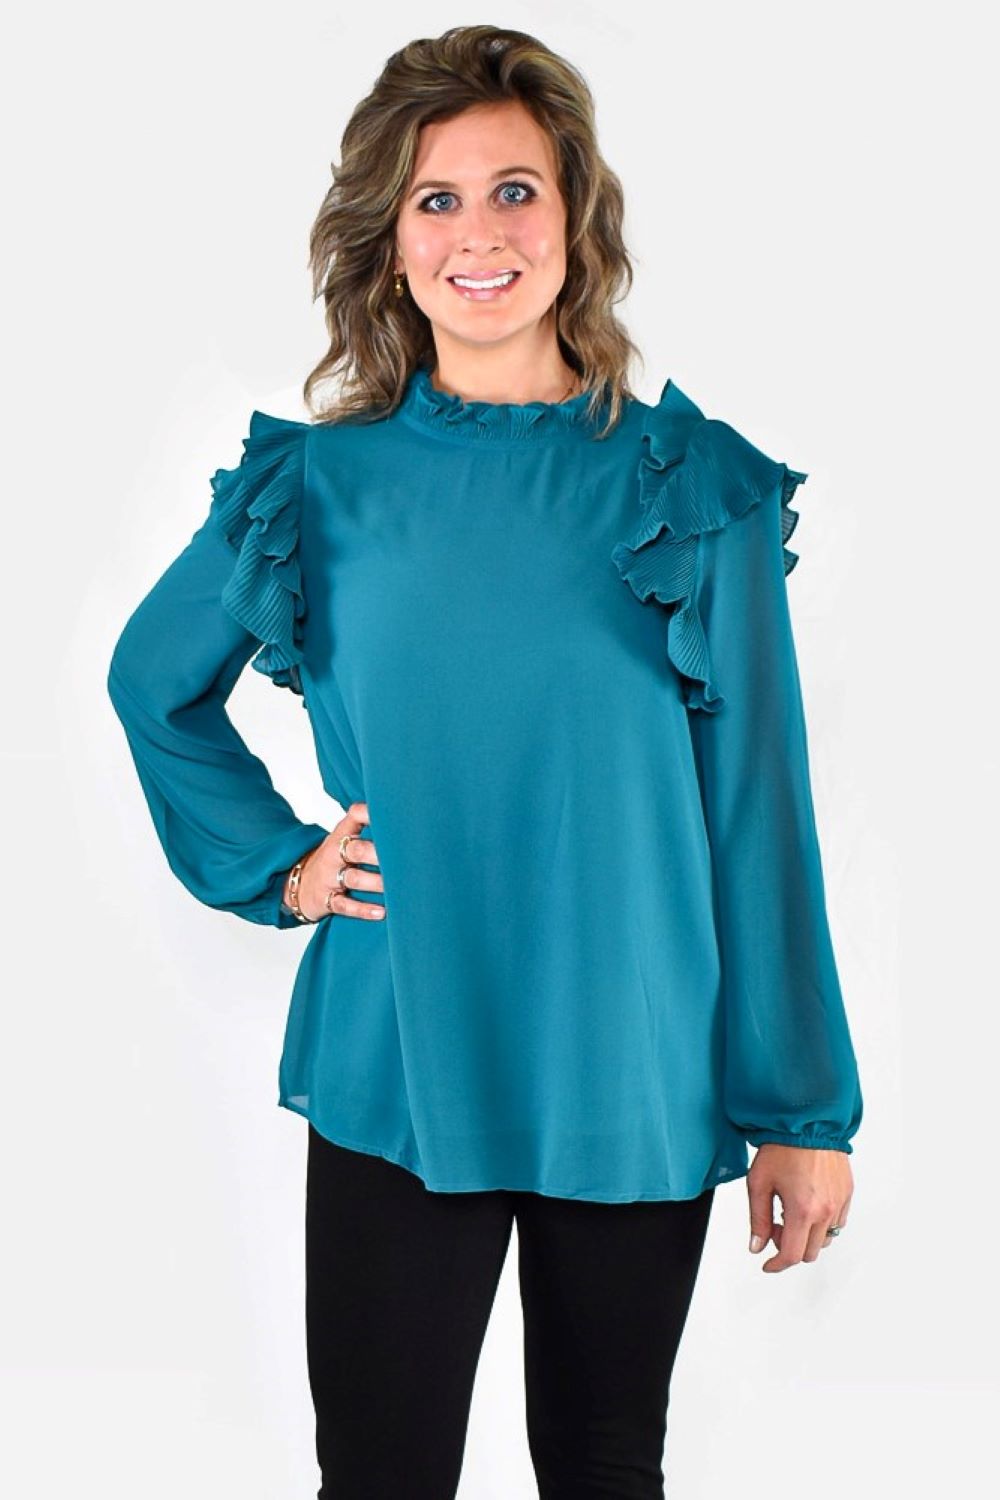 Pleated Ruffle Long Bubble Sleeve Blouse by Jodifl Clothing